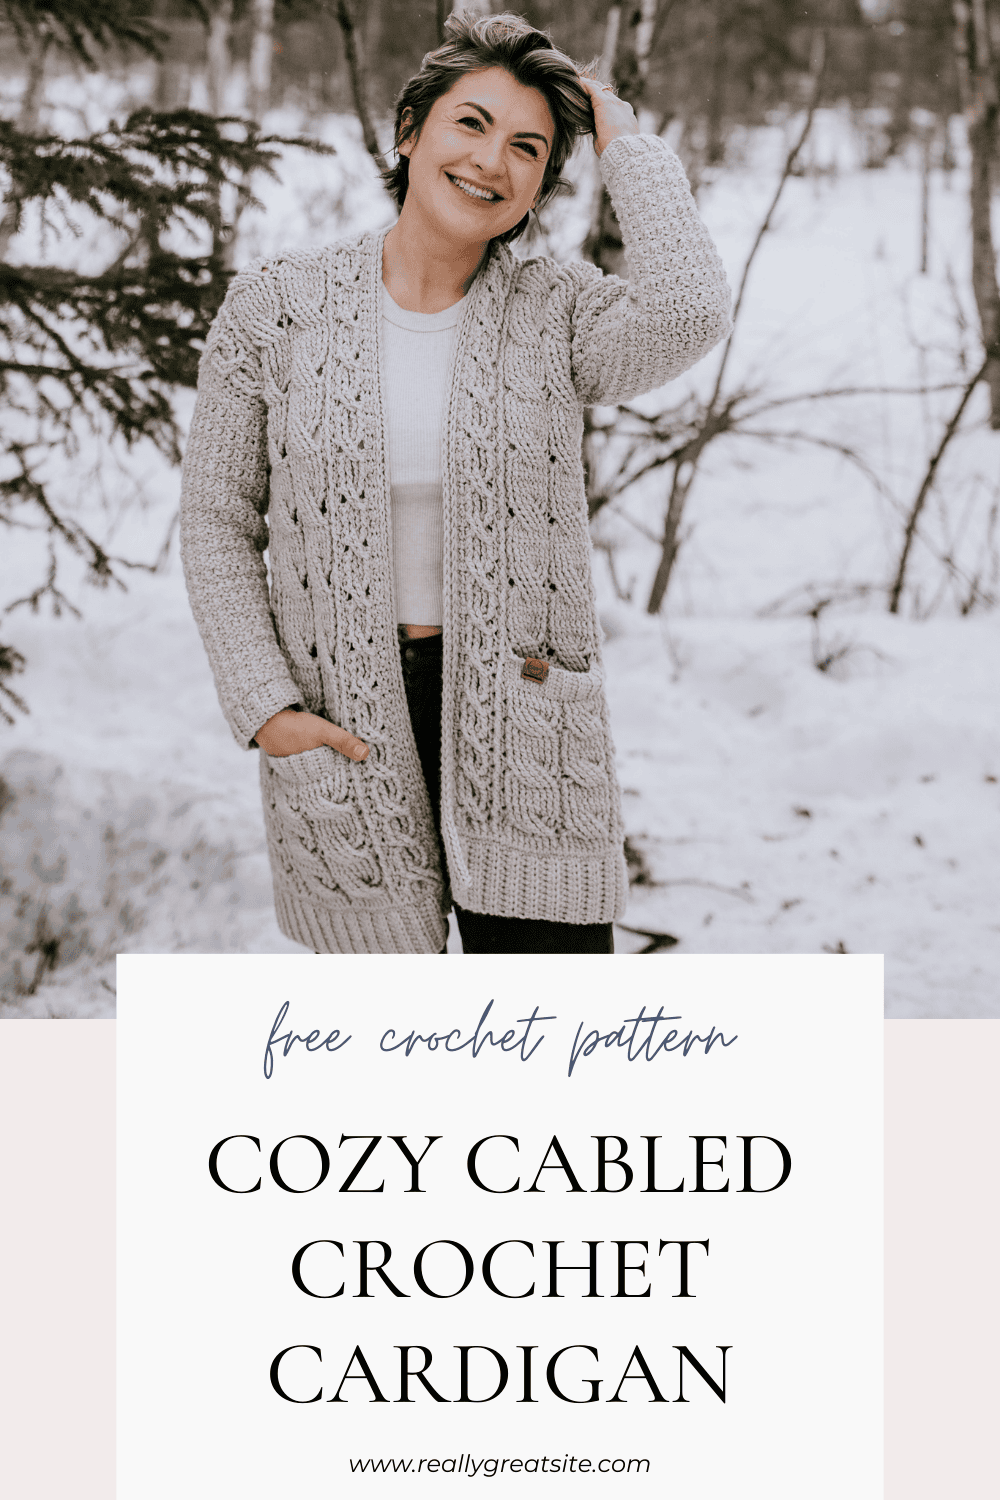 Woman modeling crochet cable cardigan near pine trees.